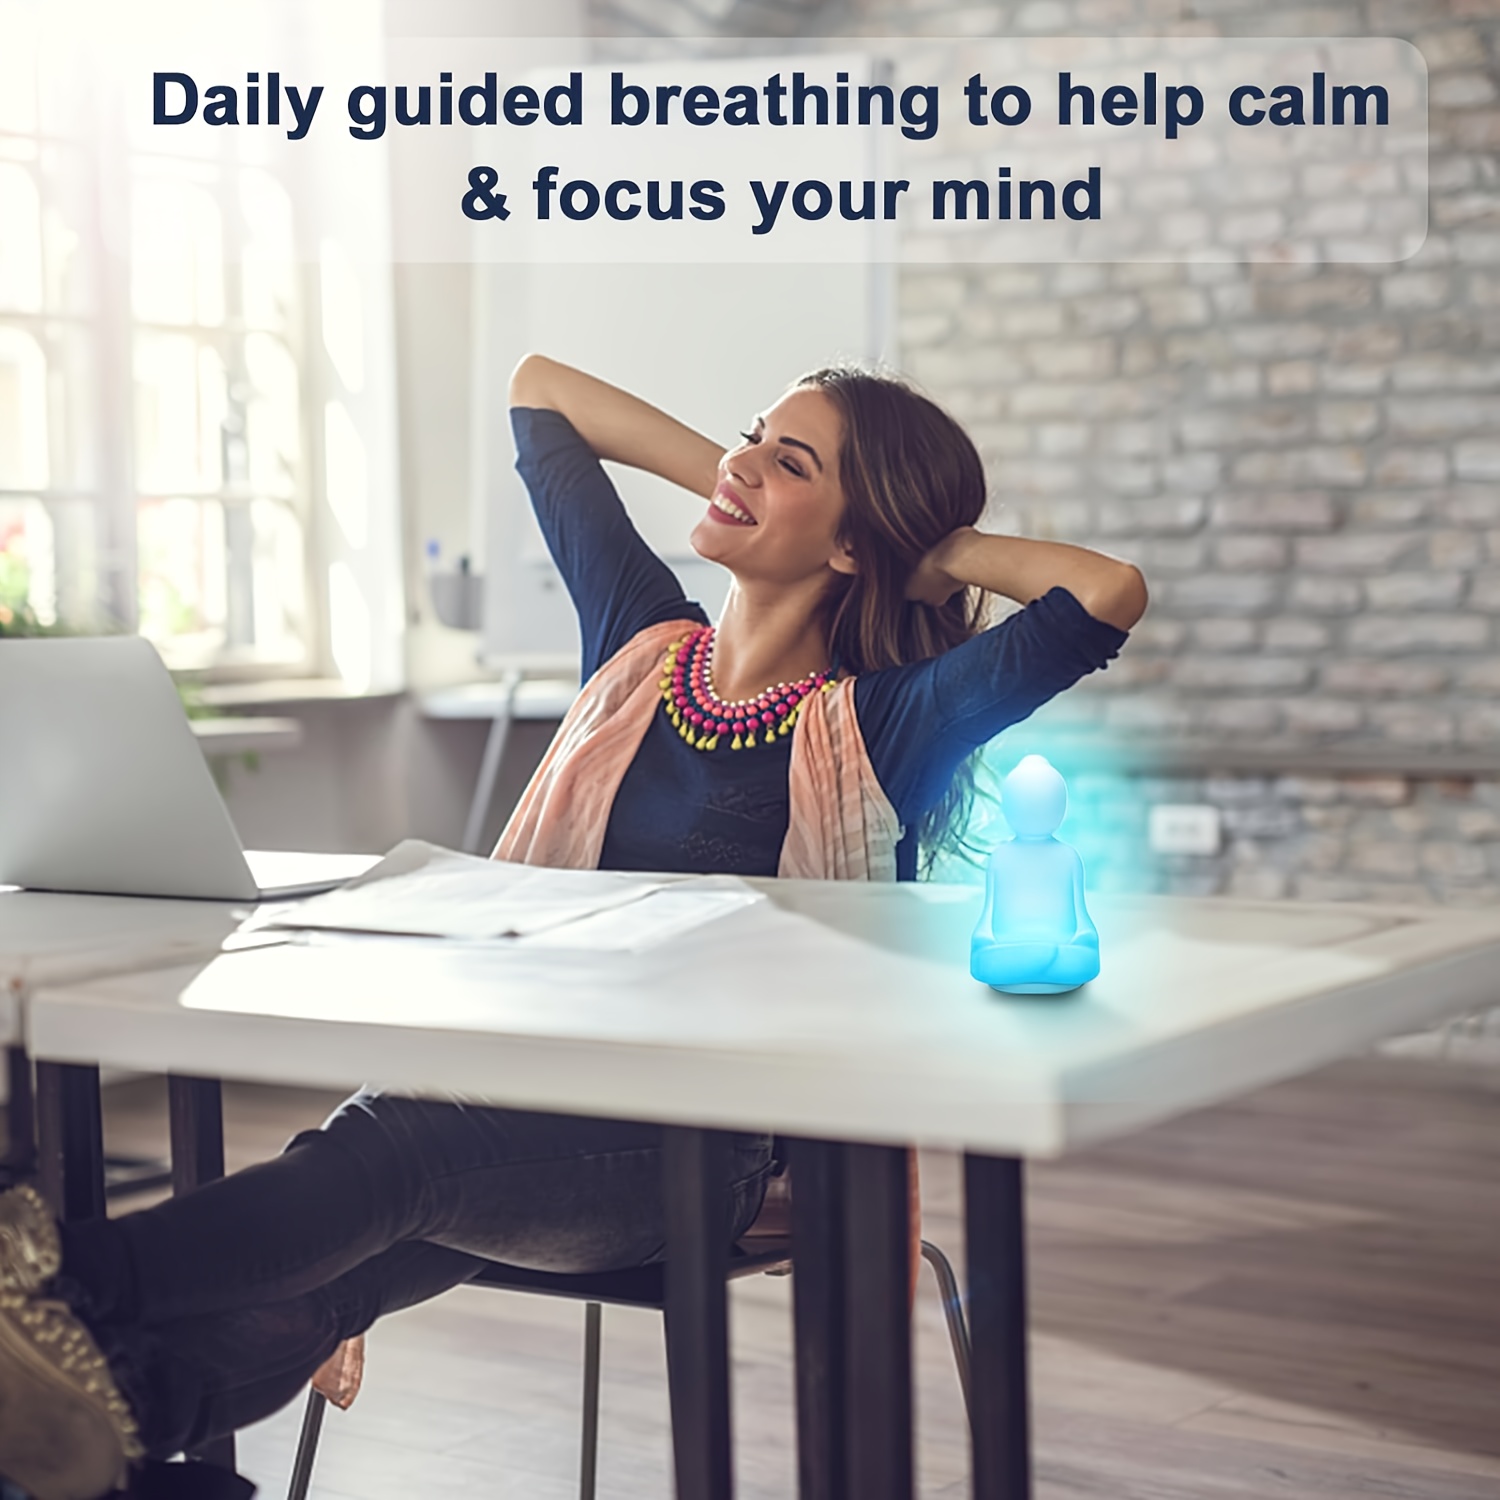 Breathing Buddha Guided Visual Mindfulness Light Meditation Breathing Tool  Silicone Night Light Slow Your Breathing Calm Your